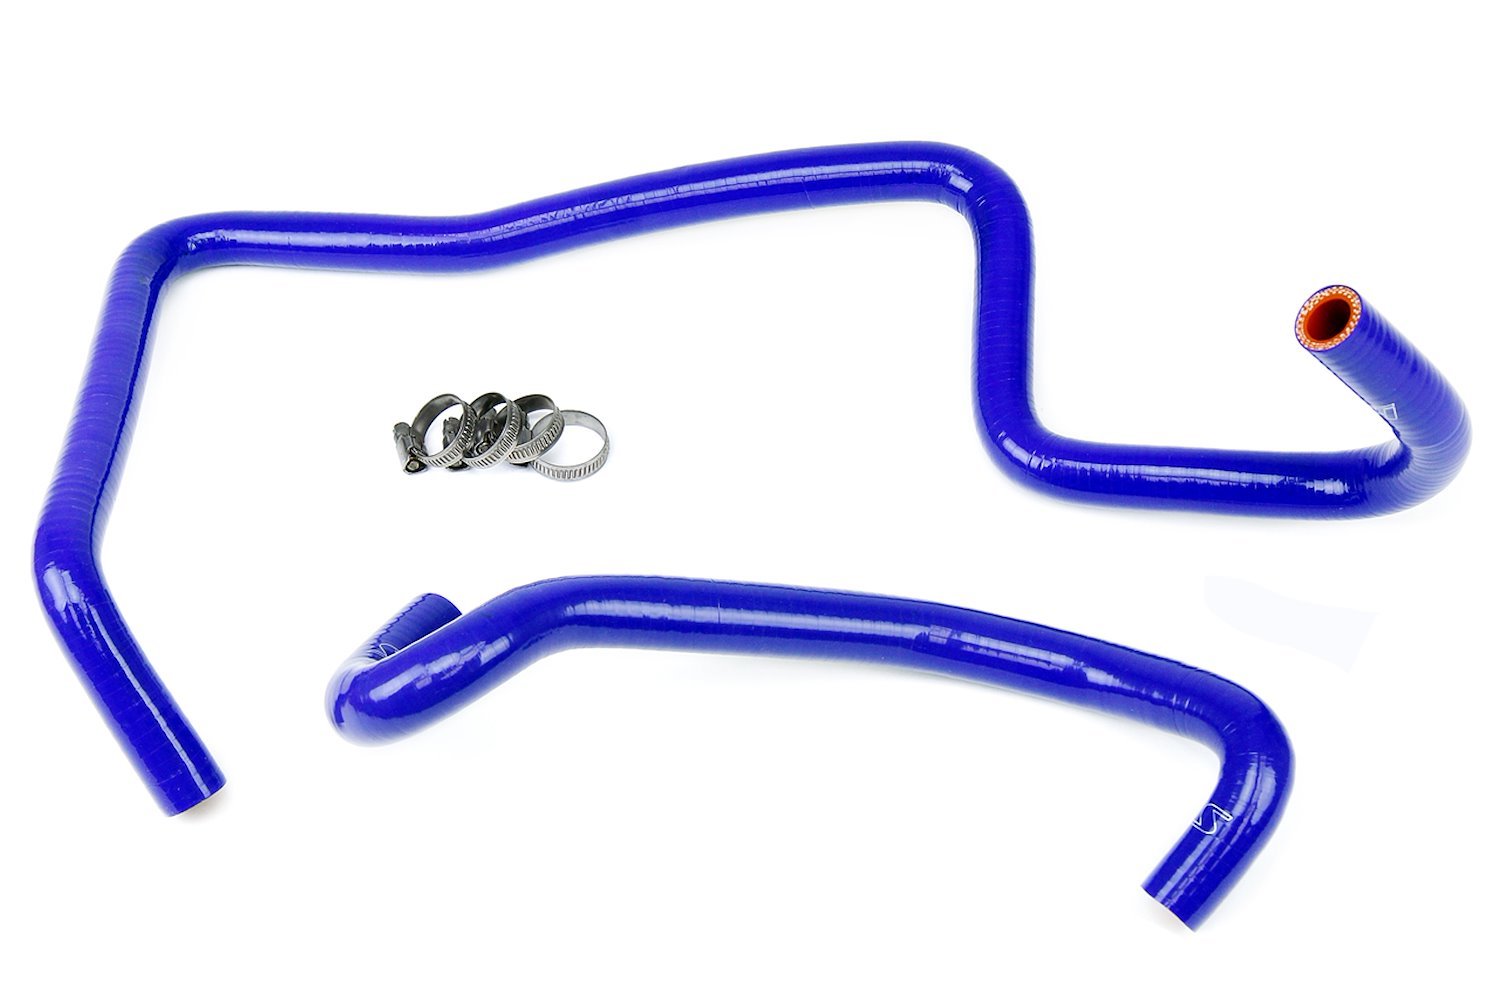 57-1471-BLUE Heater Hose Kit, High-Temp 3-Ply Reinforced Silicone, Replace OEM Rubber Heater Coolant Hoses